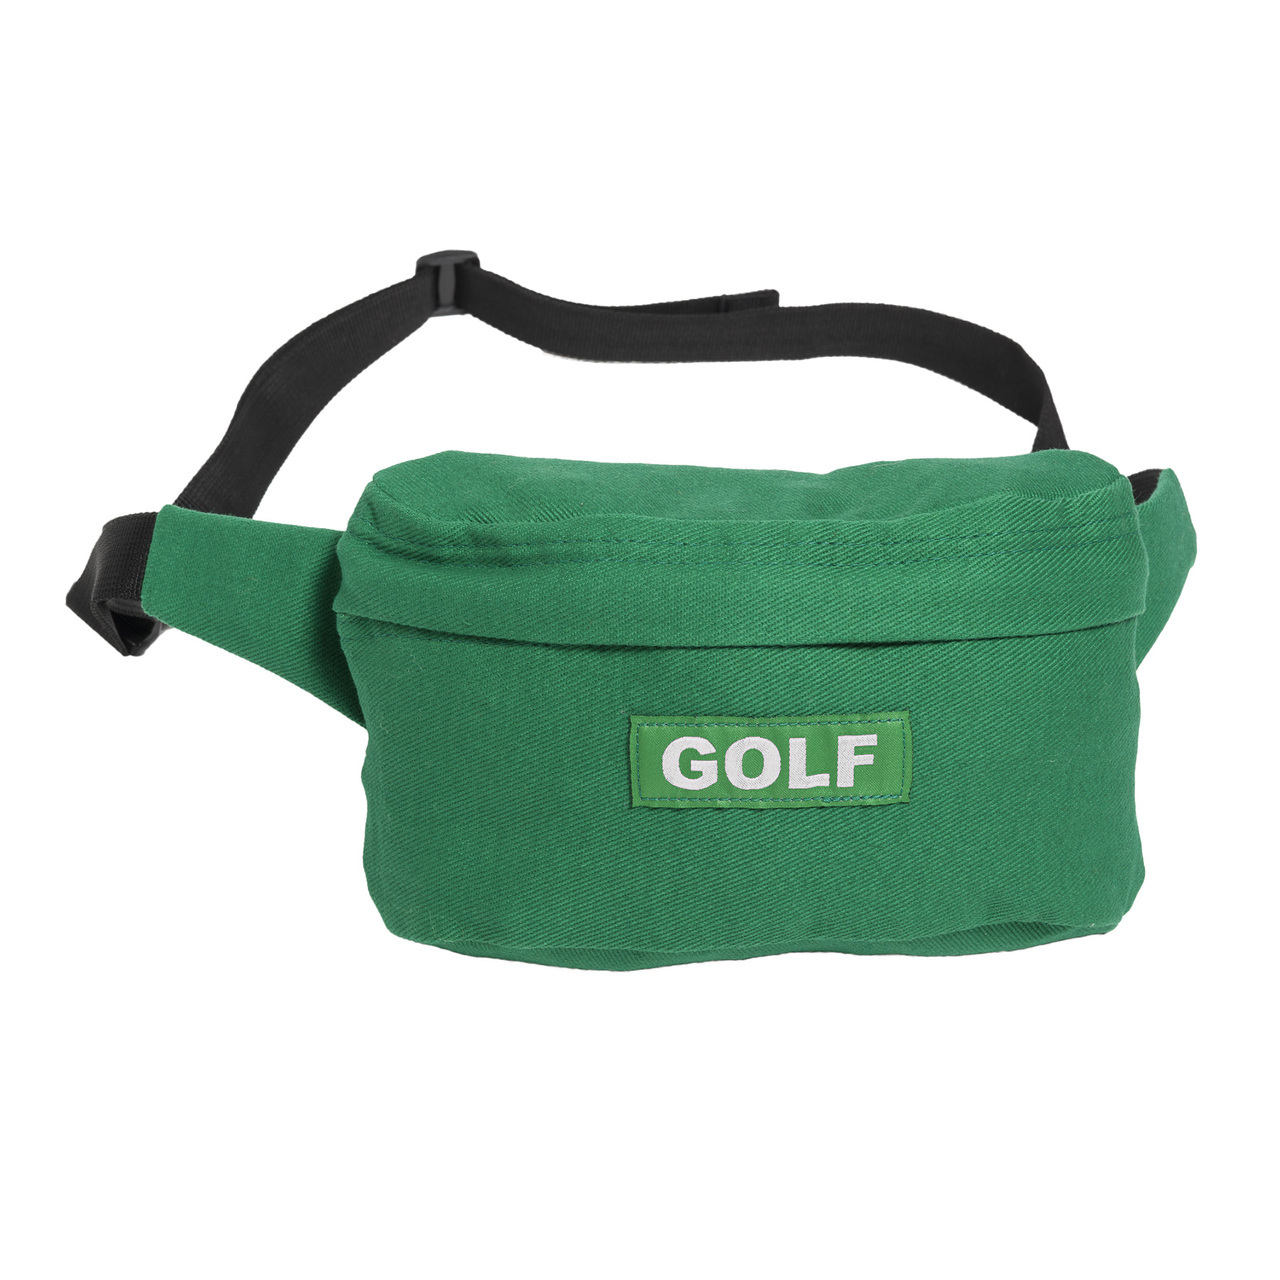 Tyler the Creator Fanny pack